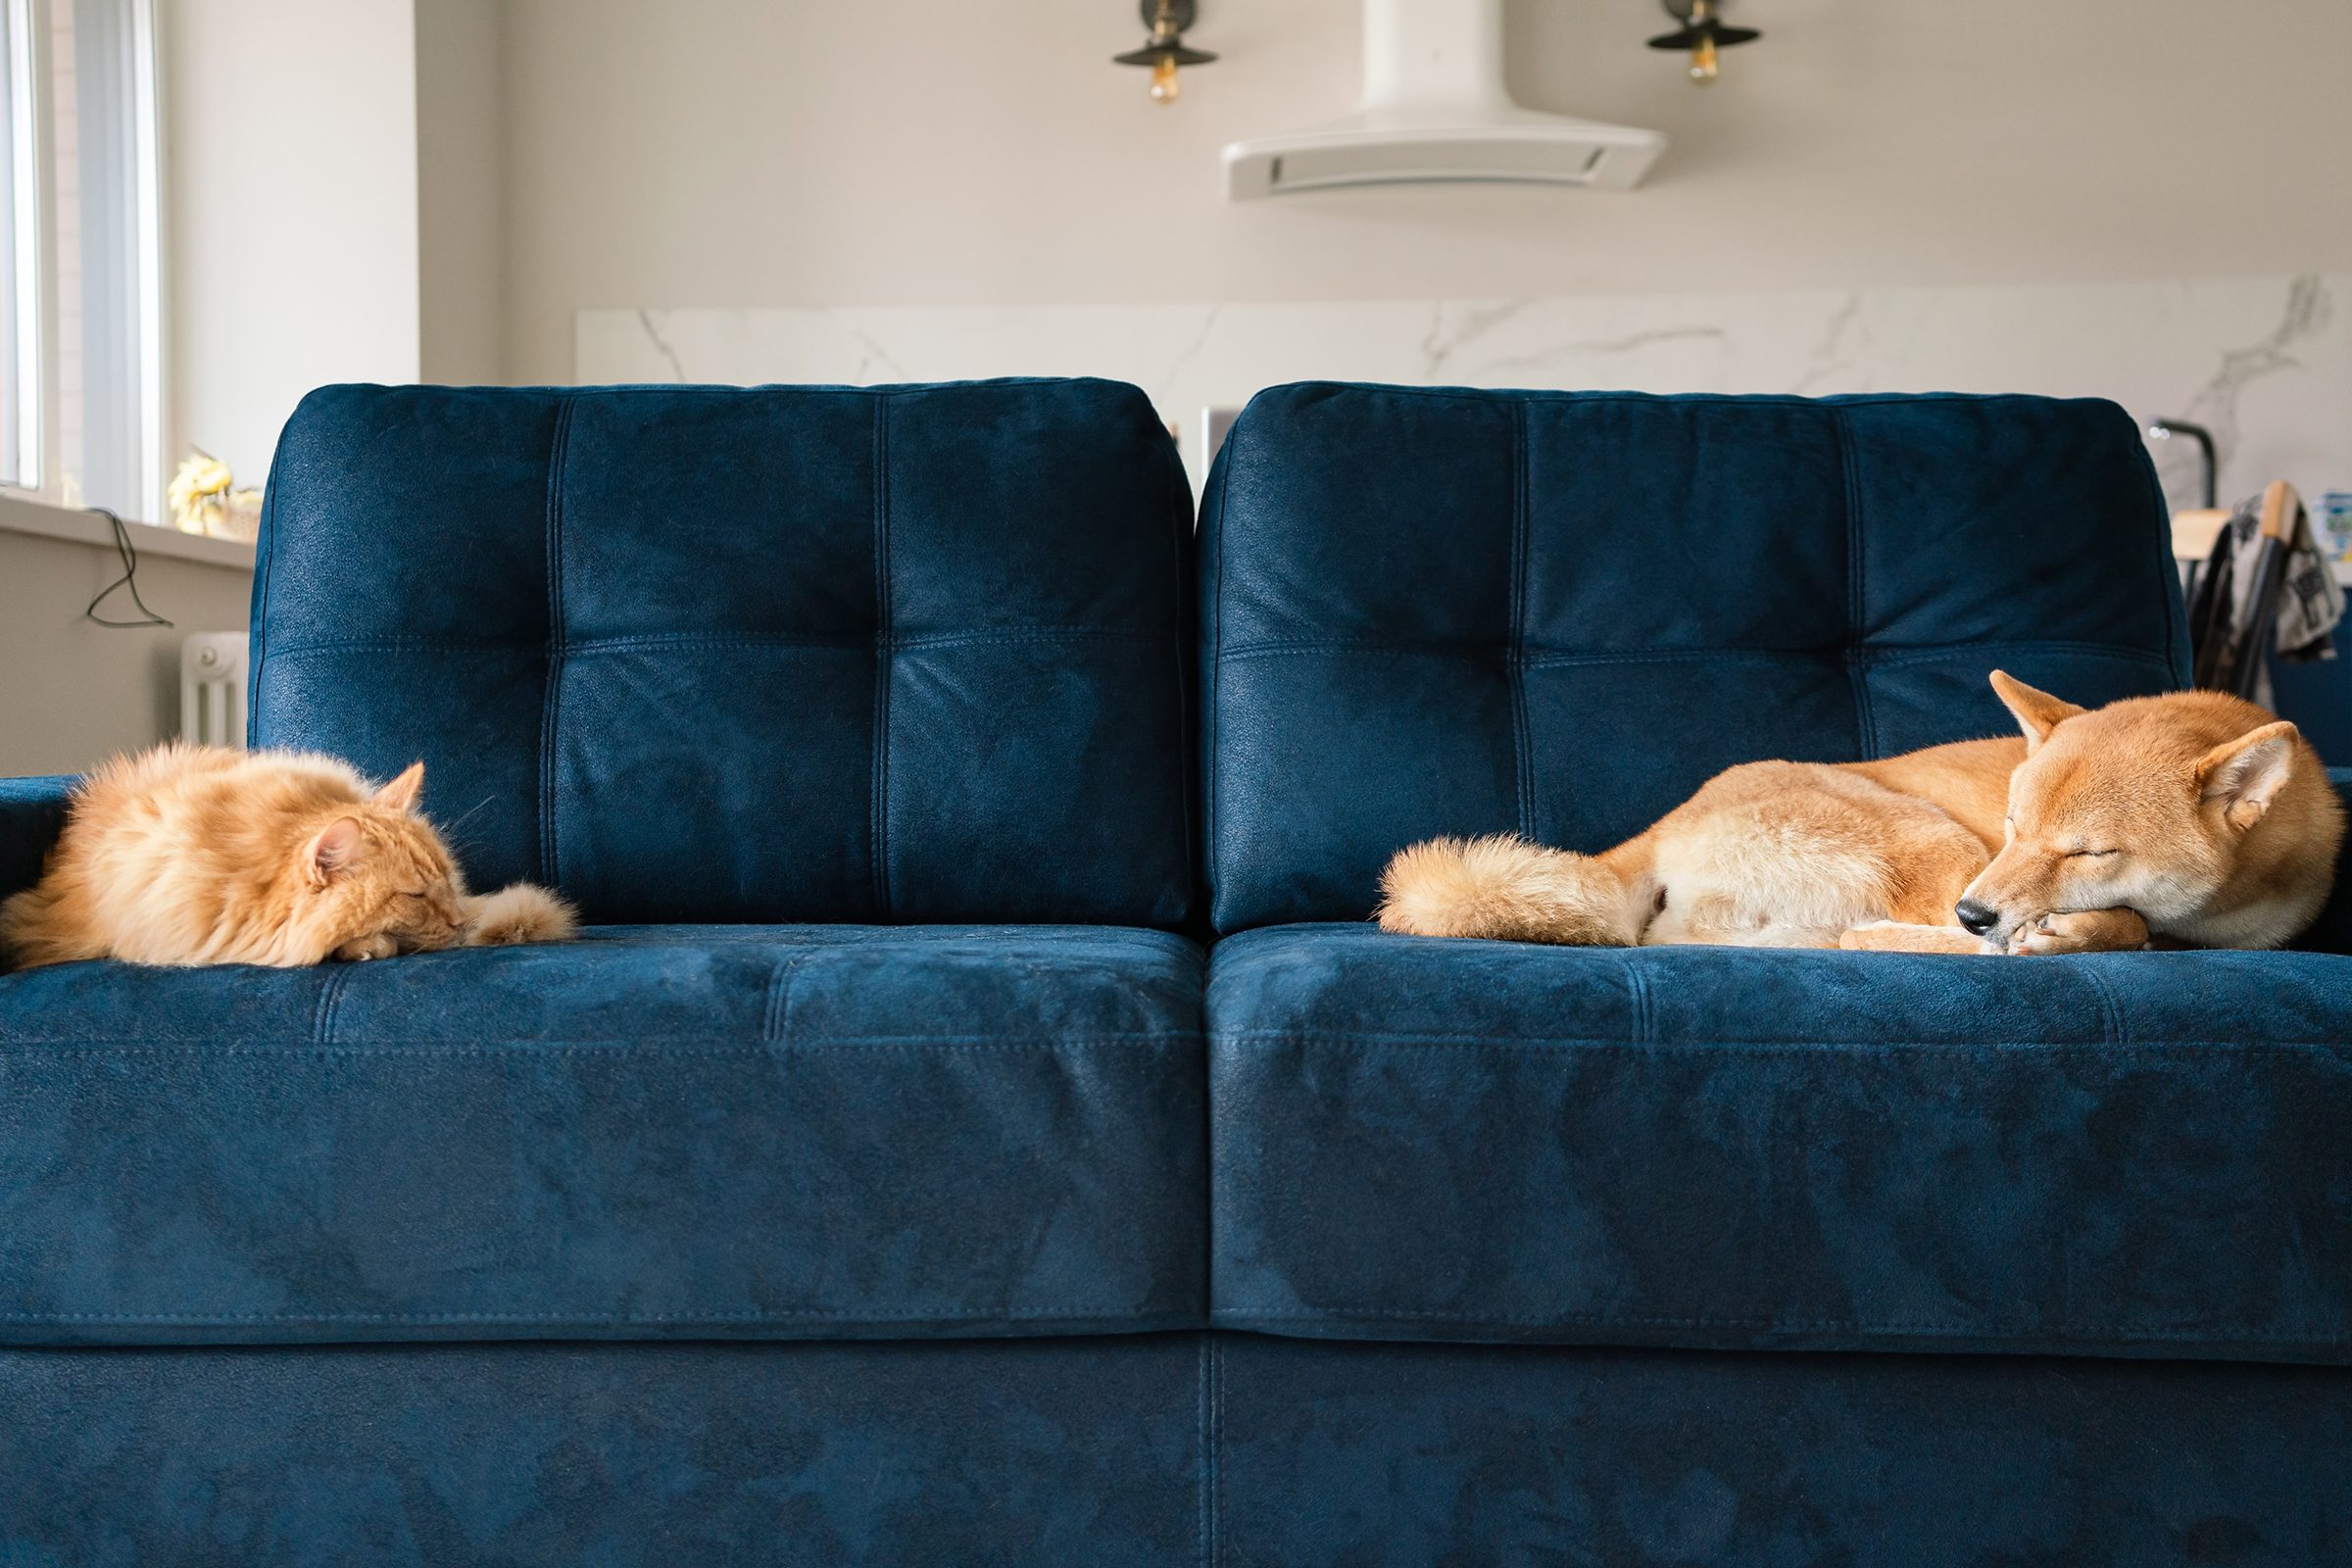 cat and dog sleeping on opposite sides of a couch